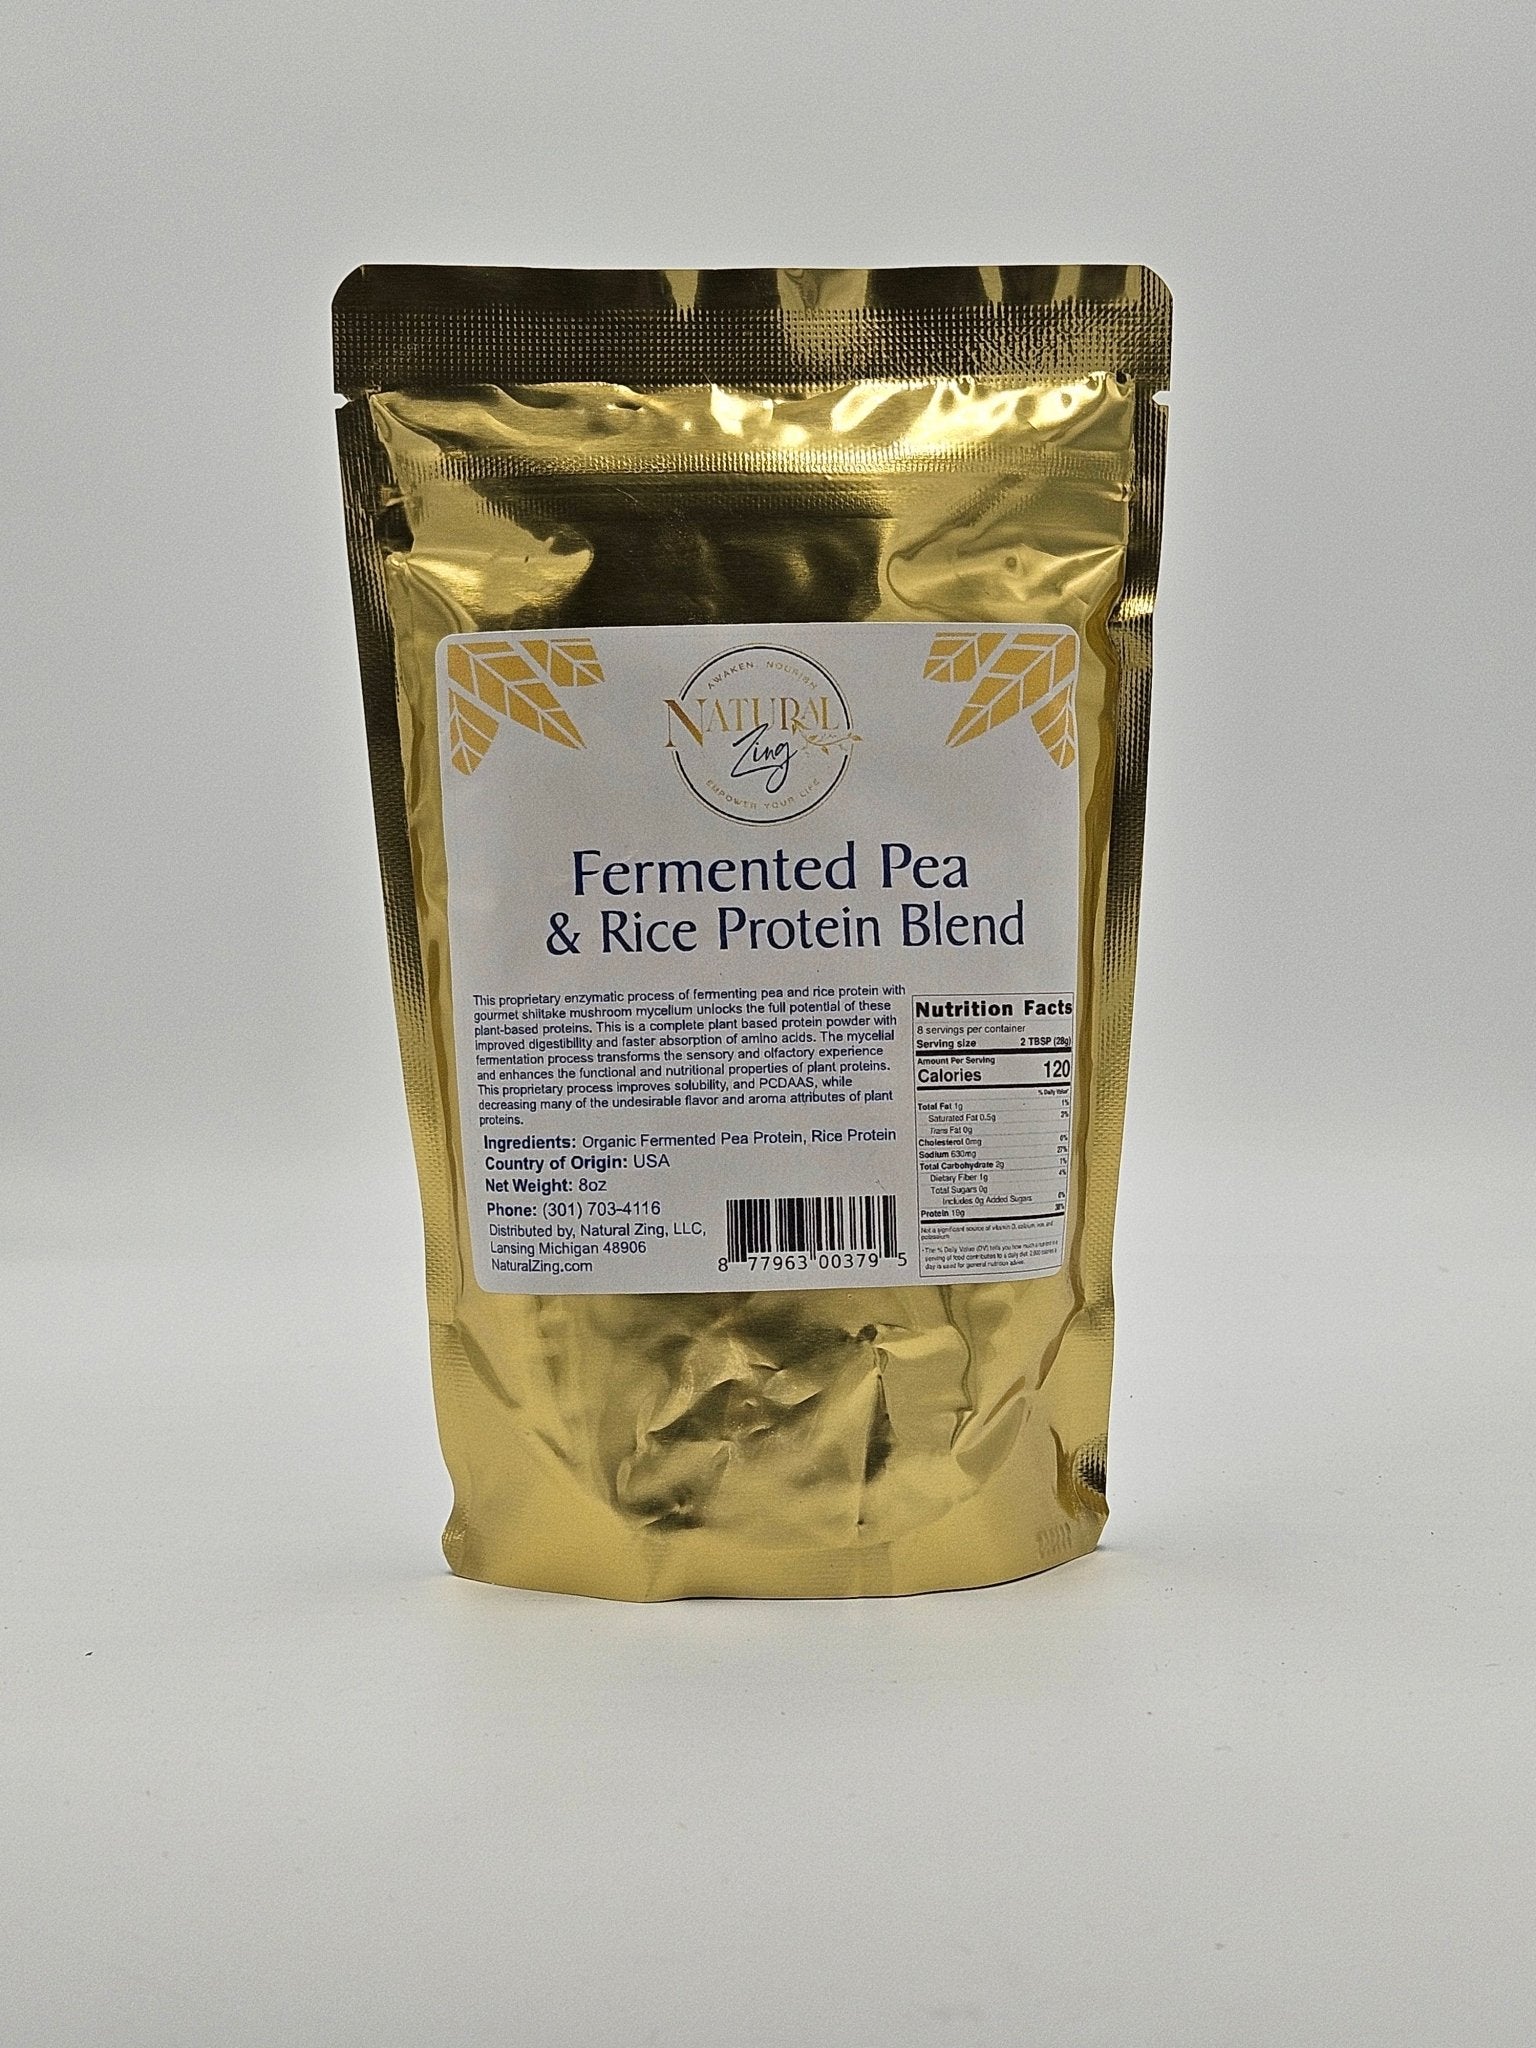 Fermented Brown Rice/Pea Protein Blend 8 oz - Natural Zing